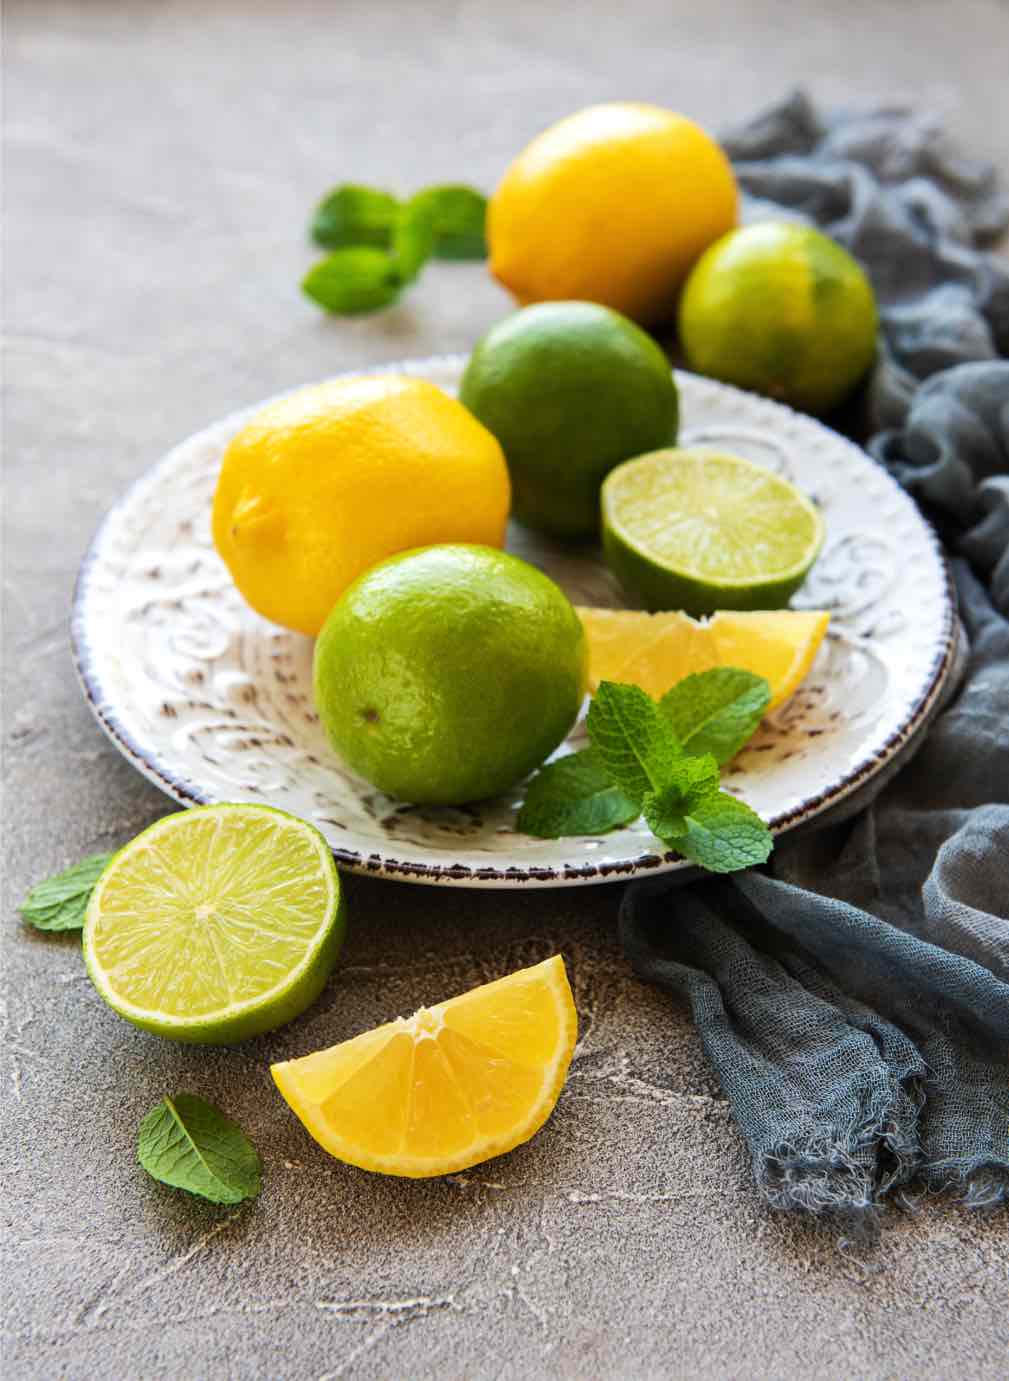 Lemons and limes are great for humans, but not for dogs - learn more with Dog Training Elite Indianapolis in Indianapolis!